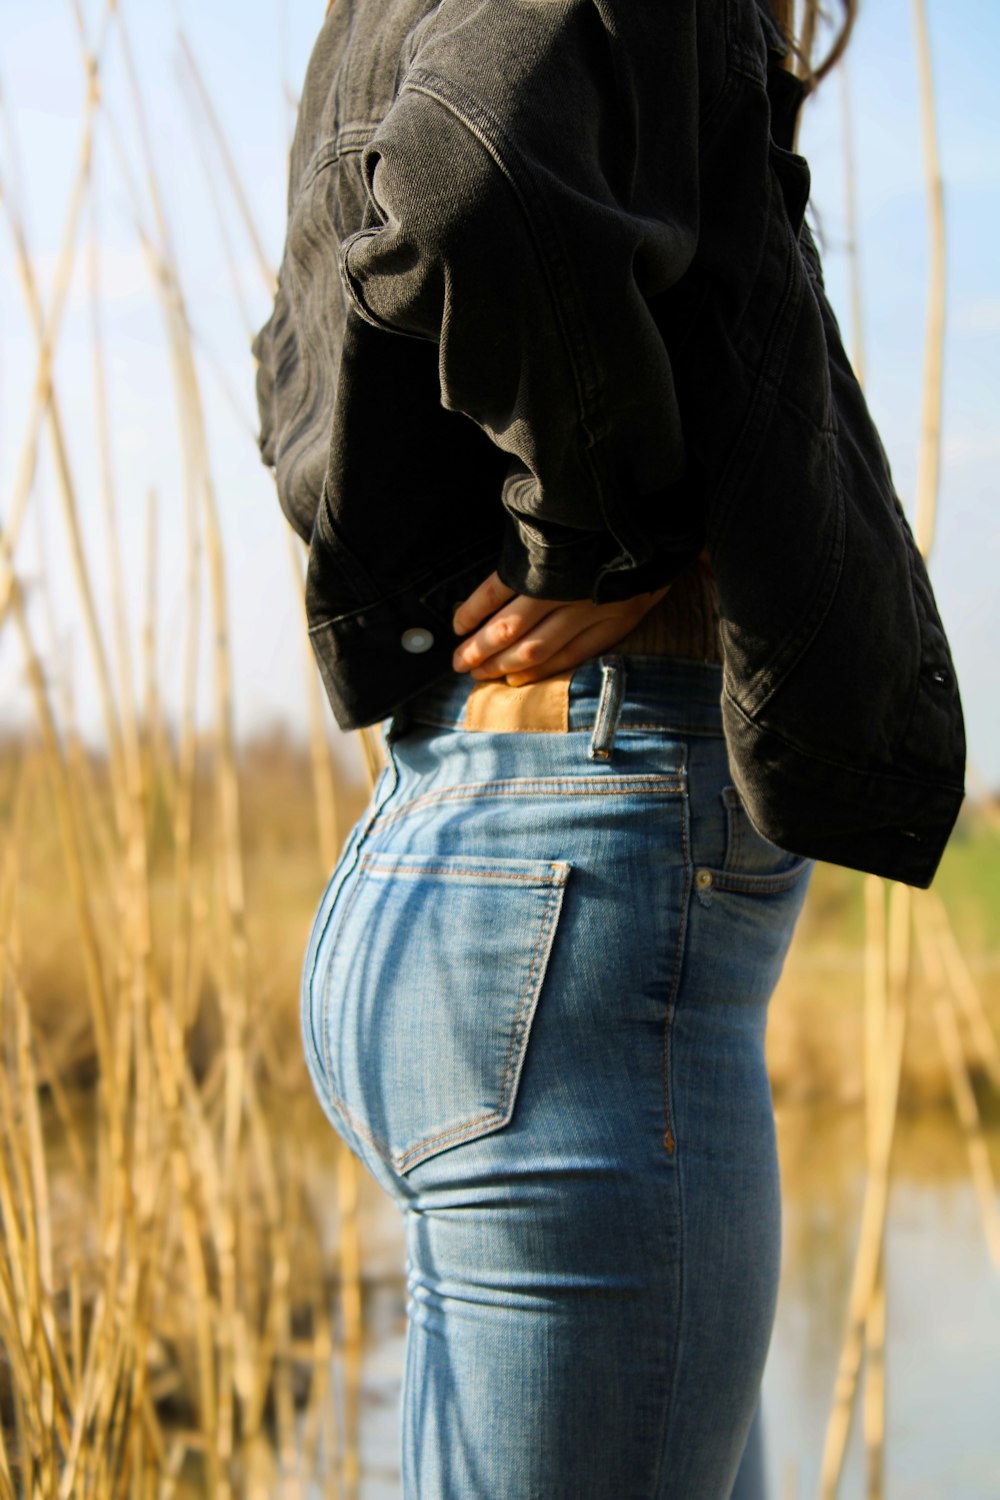 Person in black jacket and blue denim jeans standing on grass field during  daytime photo – Free Clothing Image on Unsplash